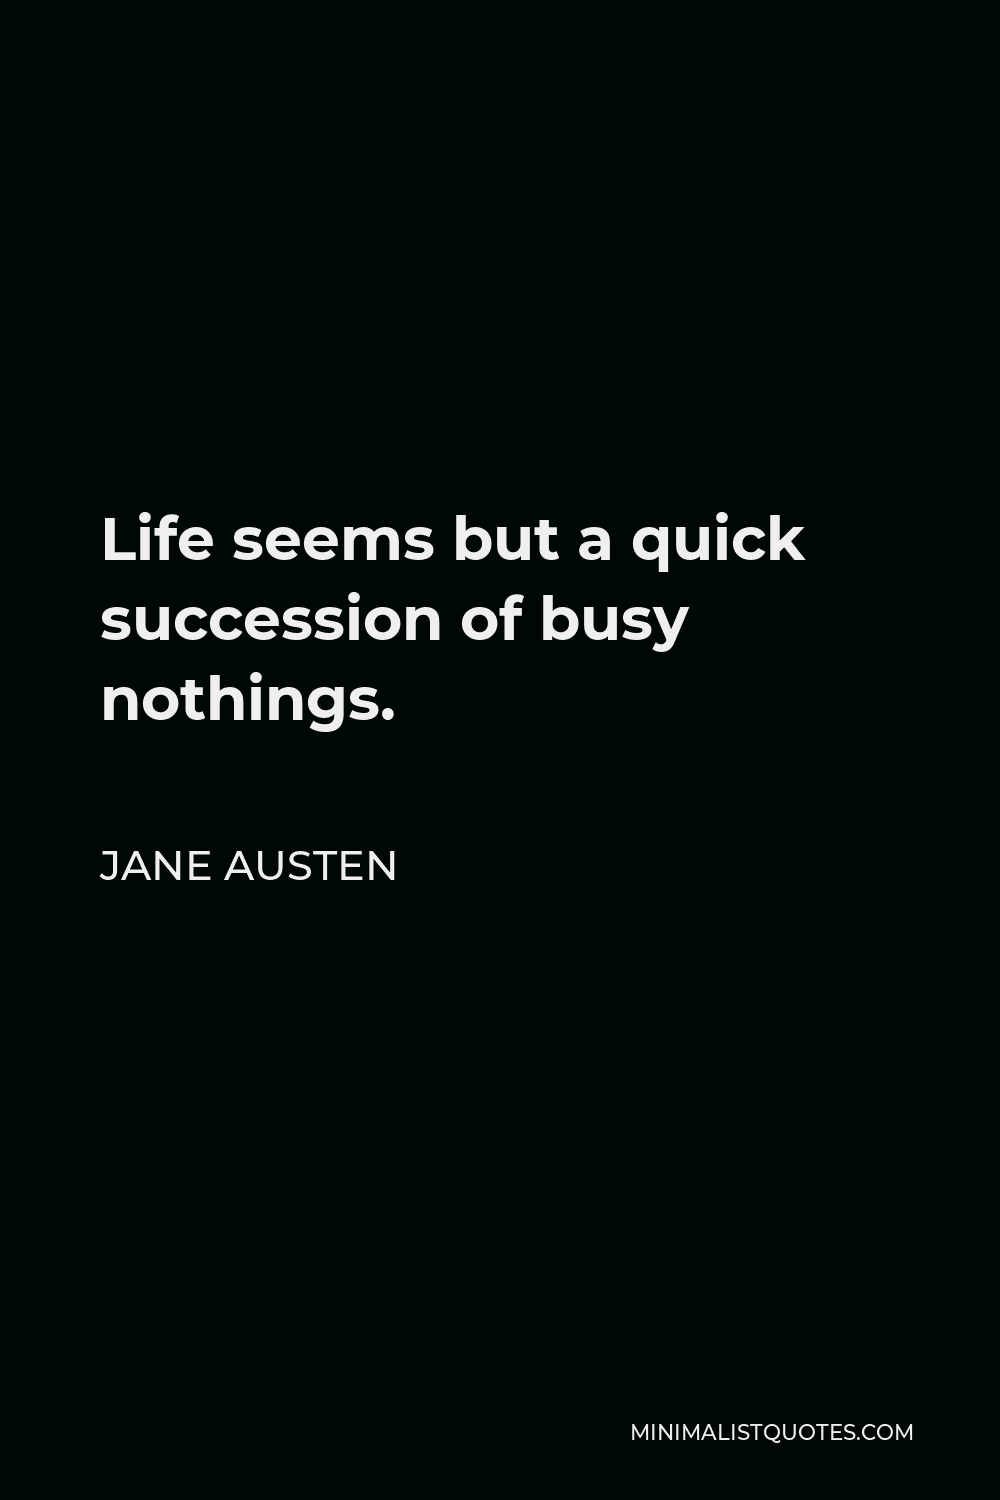 Jane Austen Quote - Life seems but a quick succession of busy nothings.